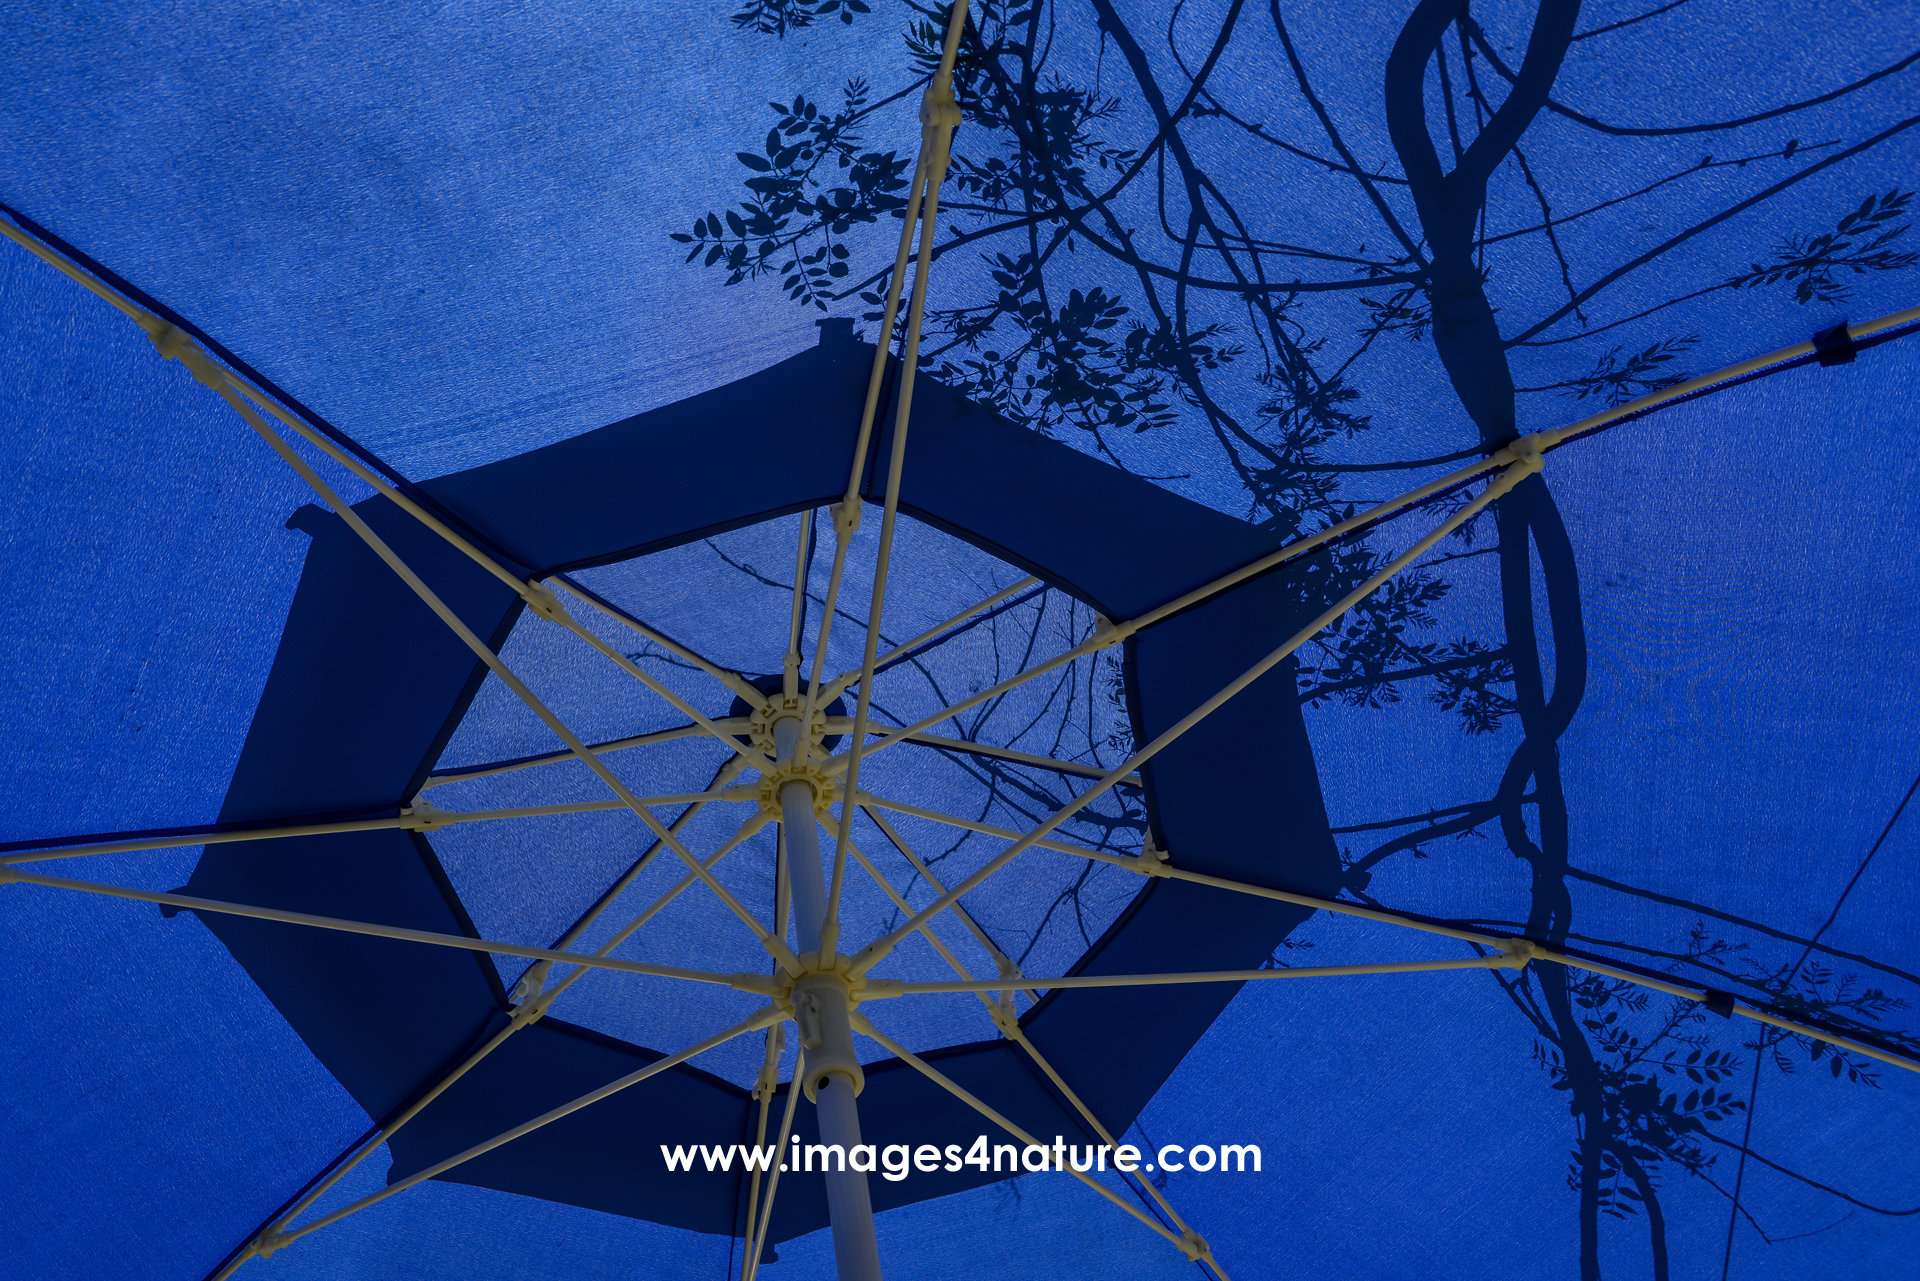 Low-angle view of a dark-blue parasol with the shade of the branch of a tree